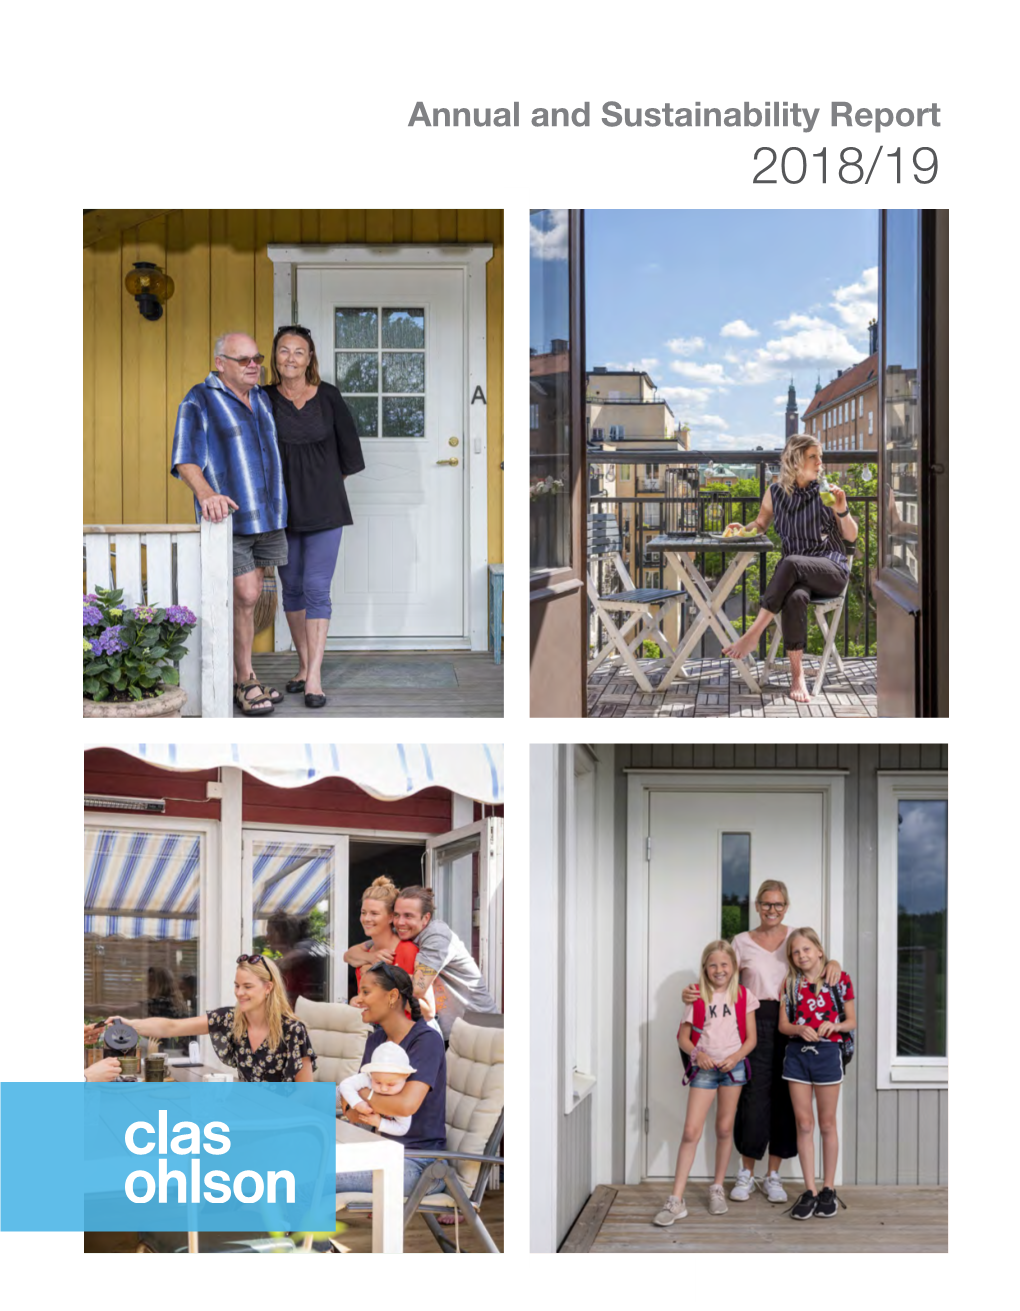 Annual and Sustainability Report 2018/19